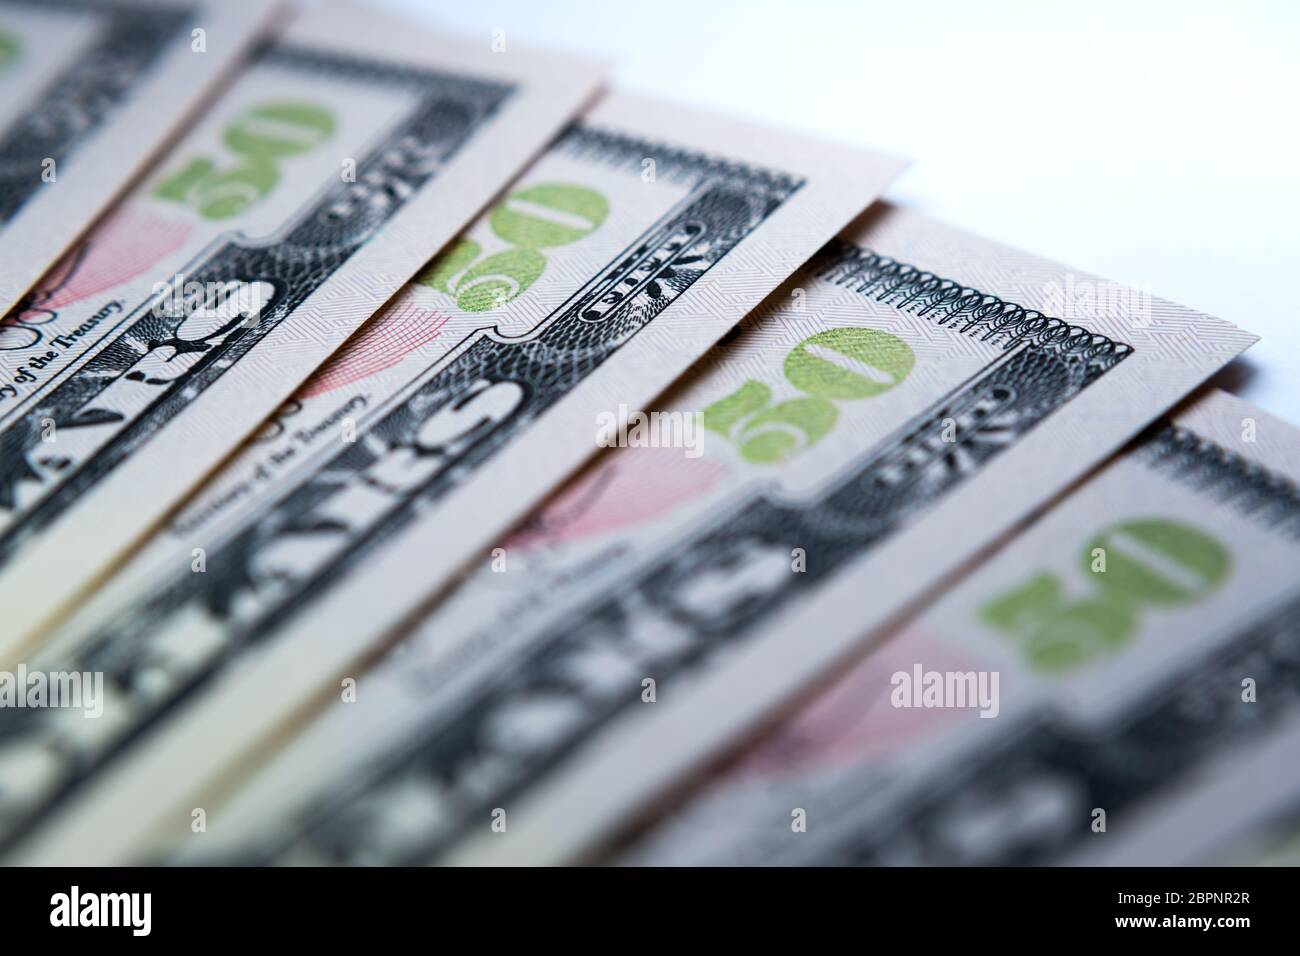 Macro phtot of new 50 US dollar banknotes. Concept image for inflation, business, finance, banking or currency exchange. Stock Photo